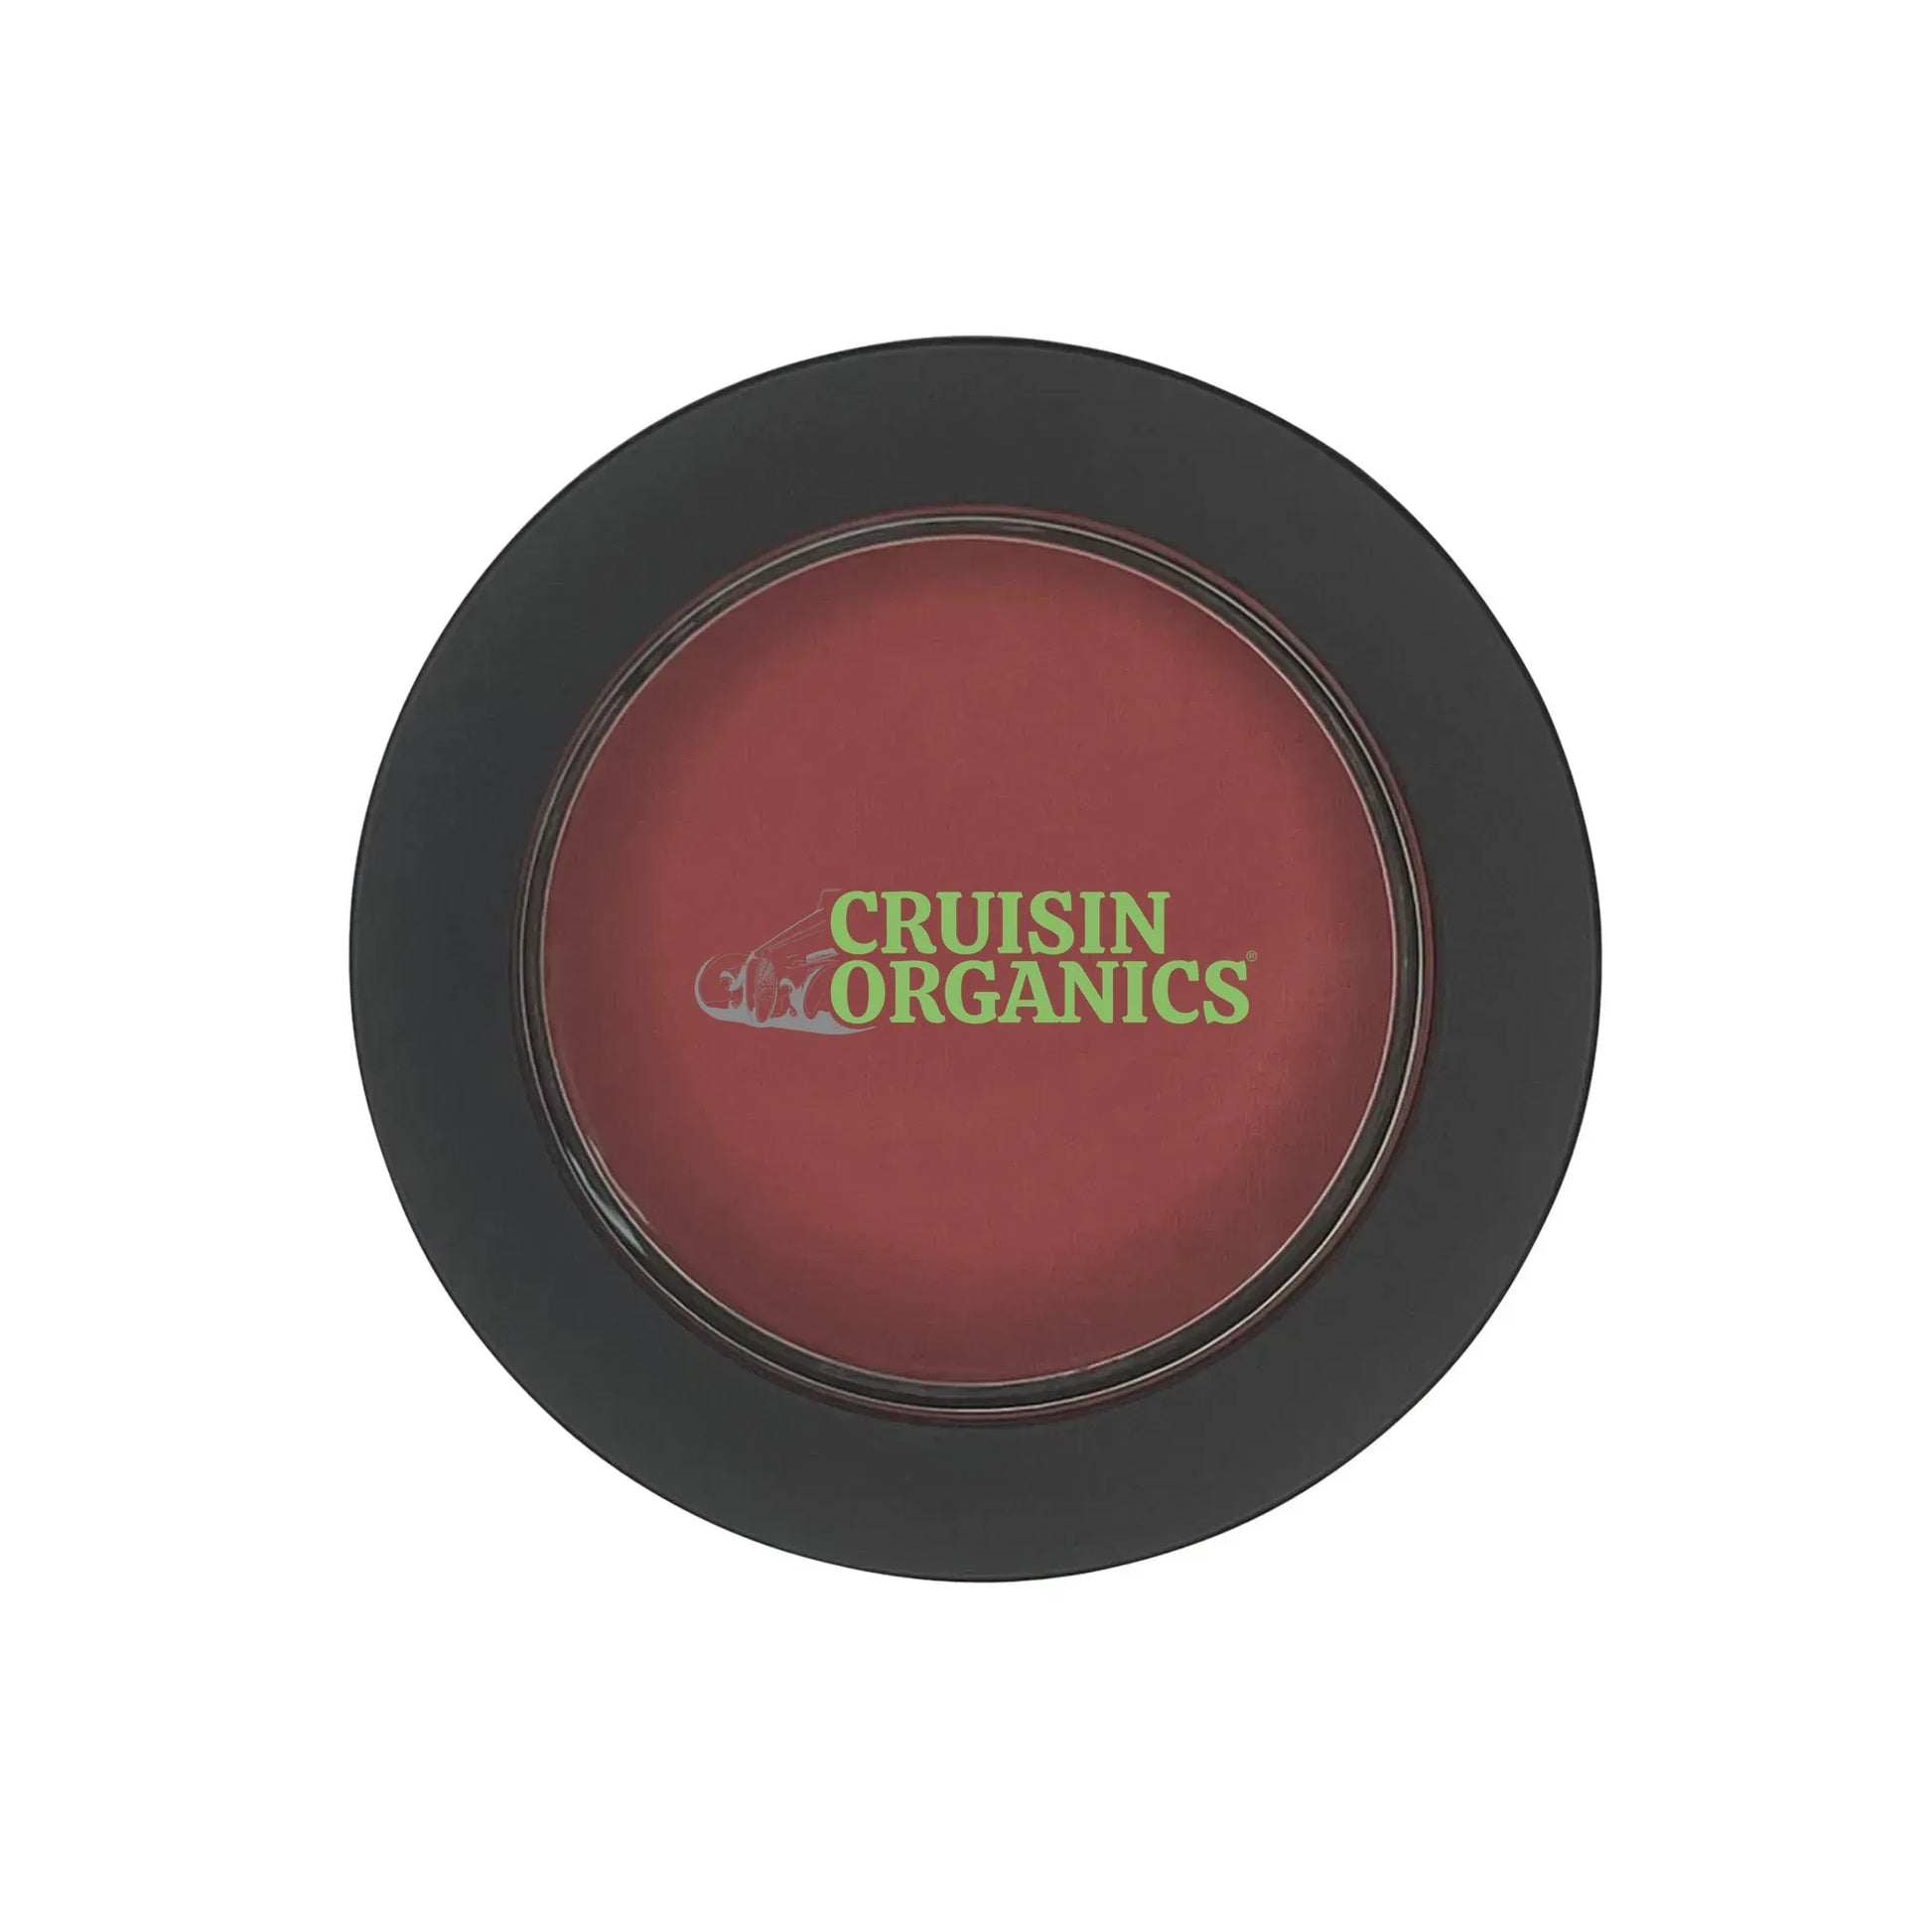 Cruisin Organics talc-free blush is a soft-pressed powder that blends into skin! Get the natural flush look your cheeks have always dreamed of. In a single pan, mix and match your favorite blush shades on-the-go for a day trip or a night out in it's finest powder.